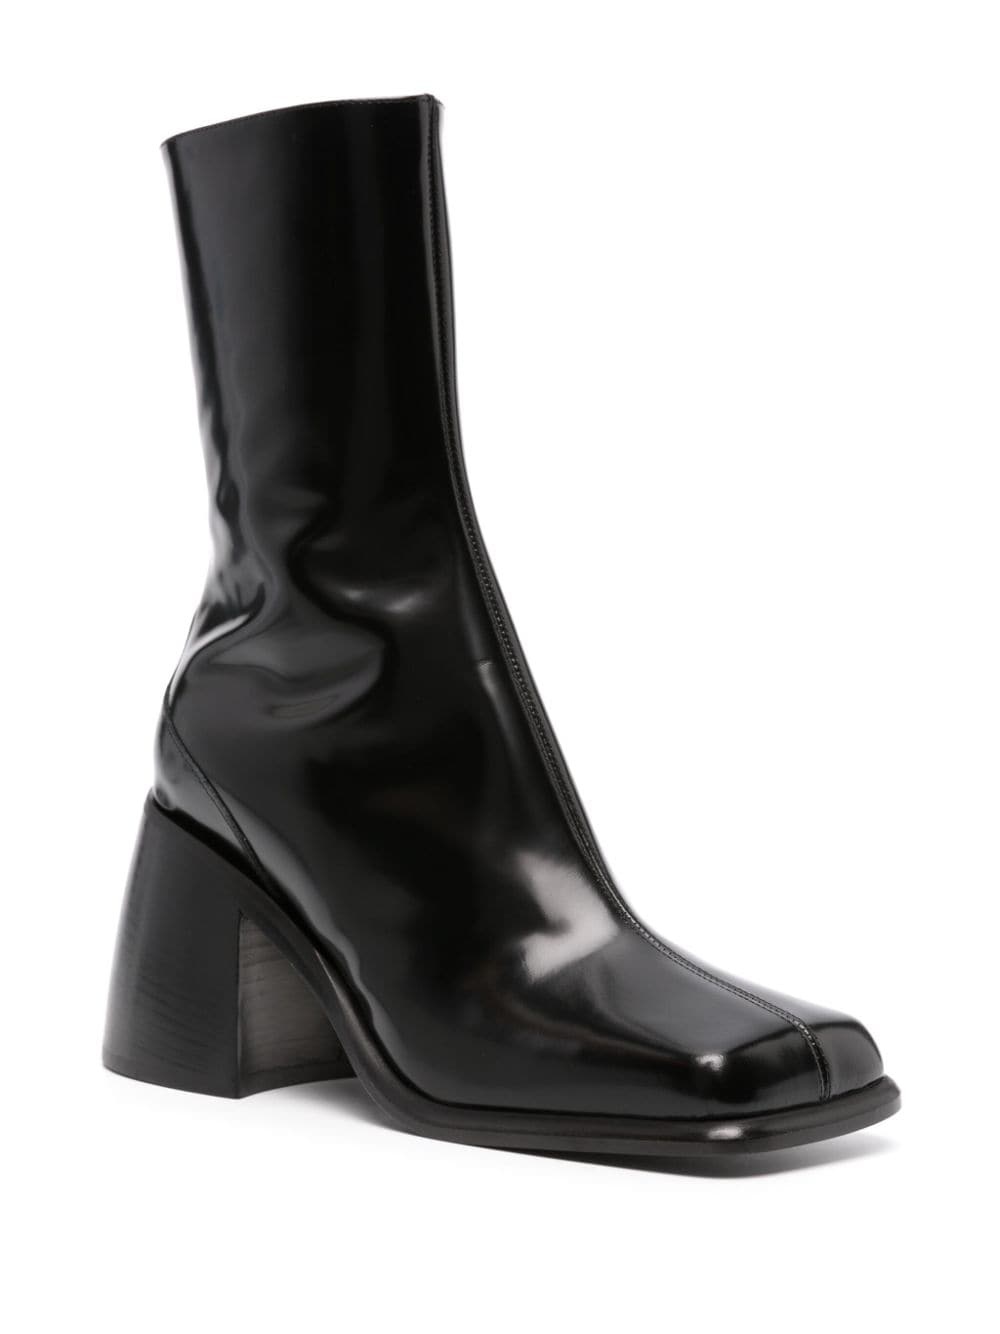 80mm square-toe leather boots - 2